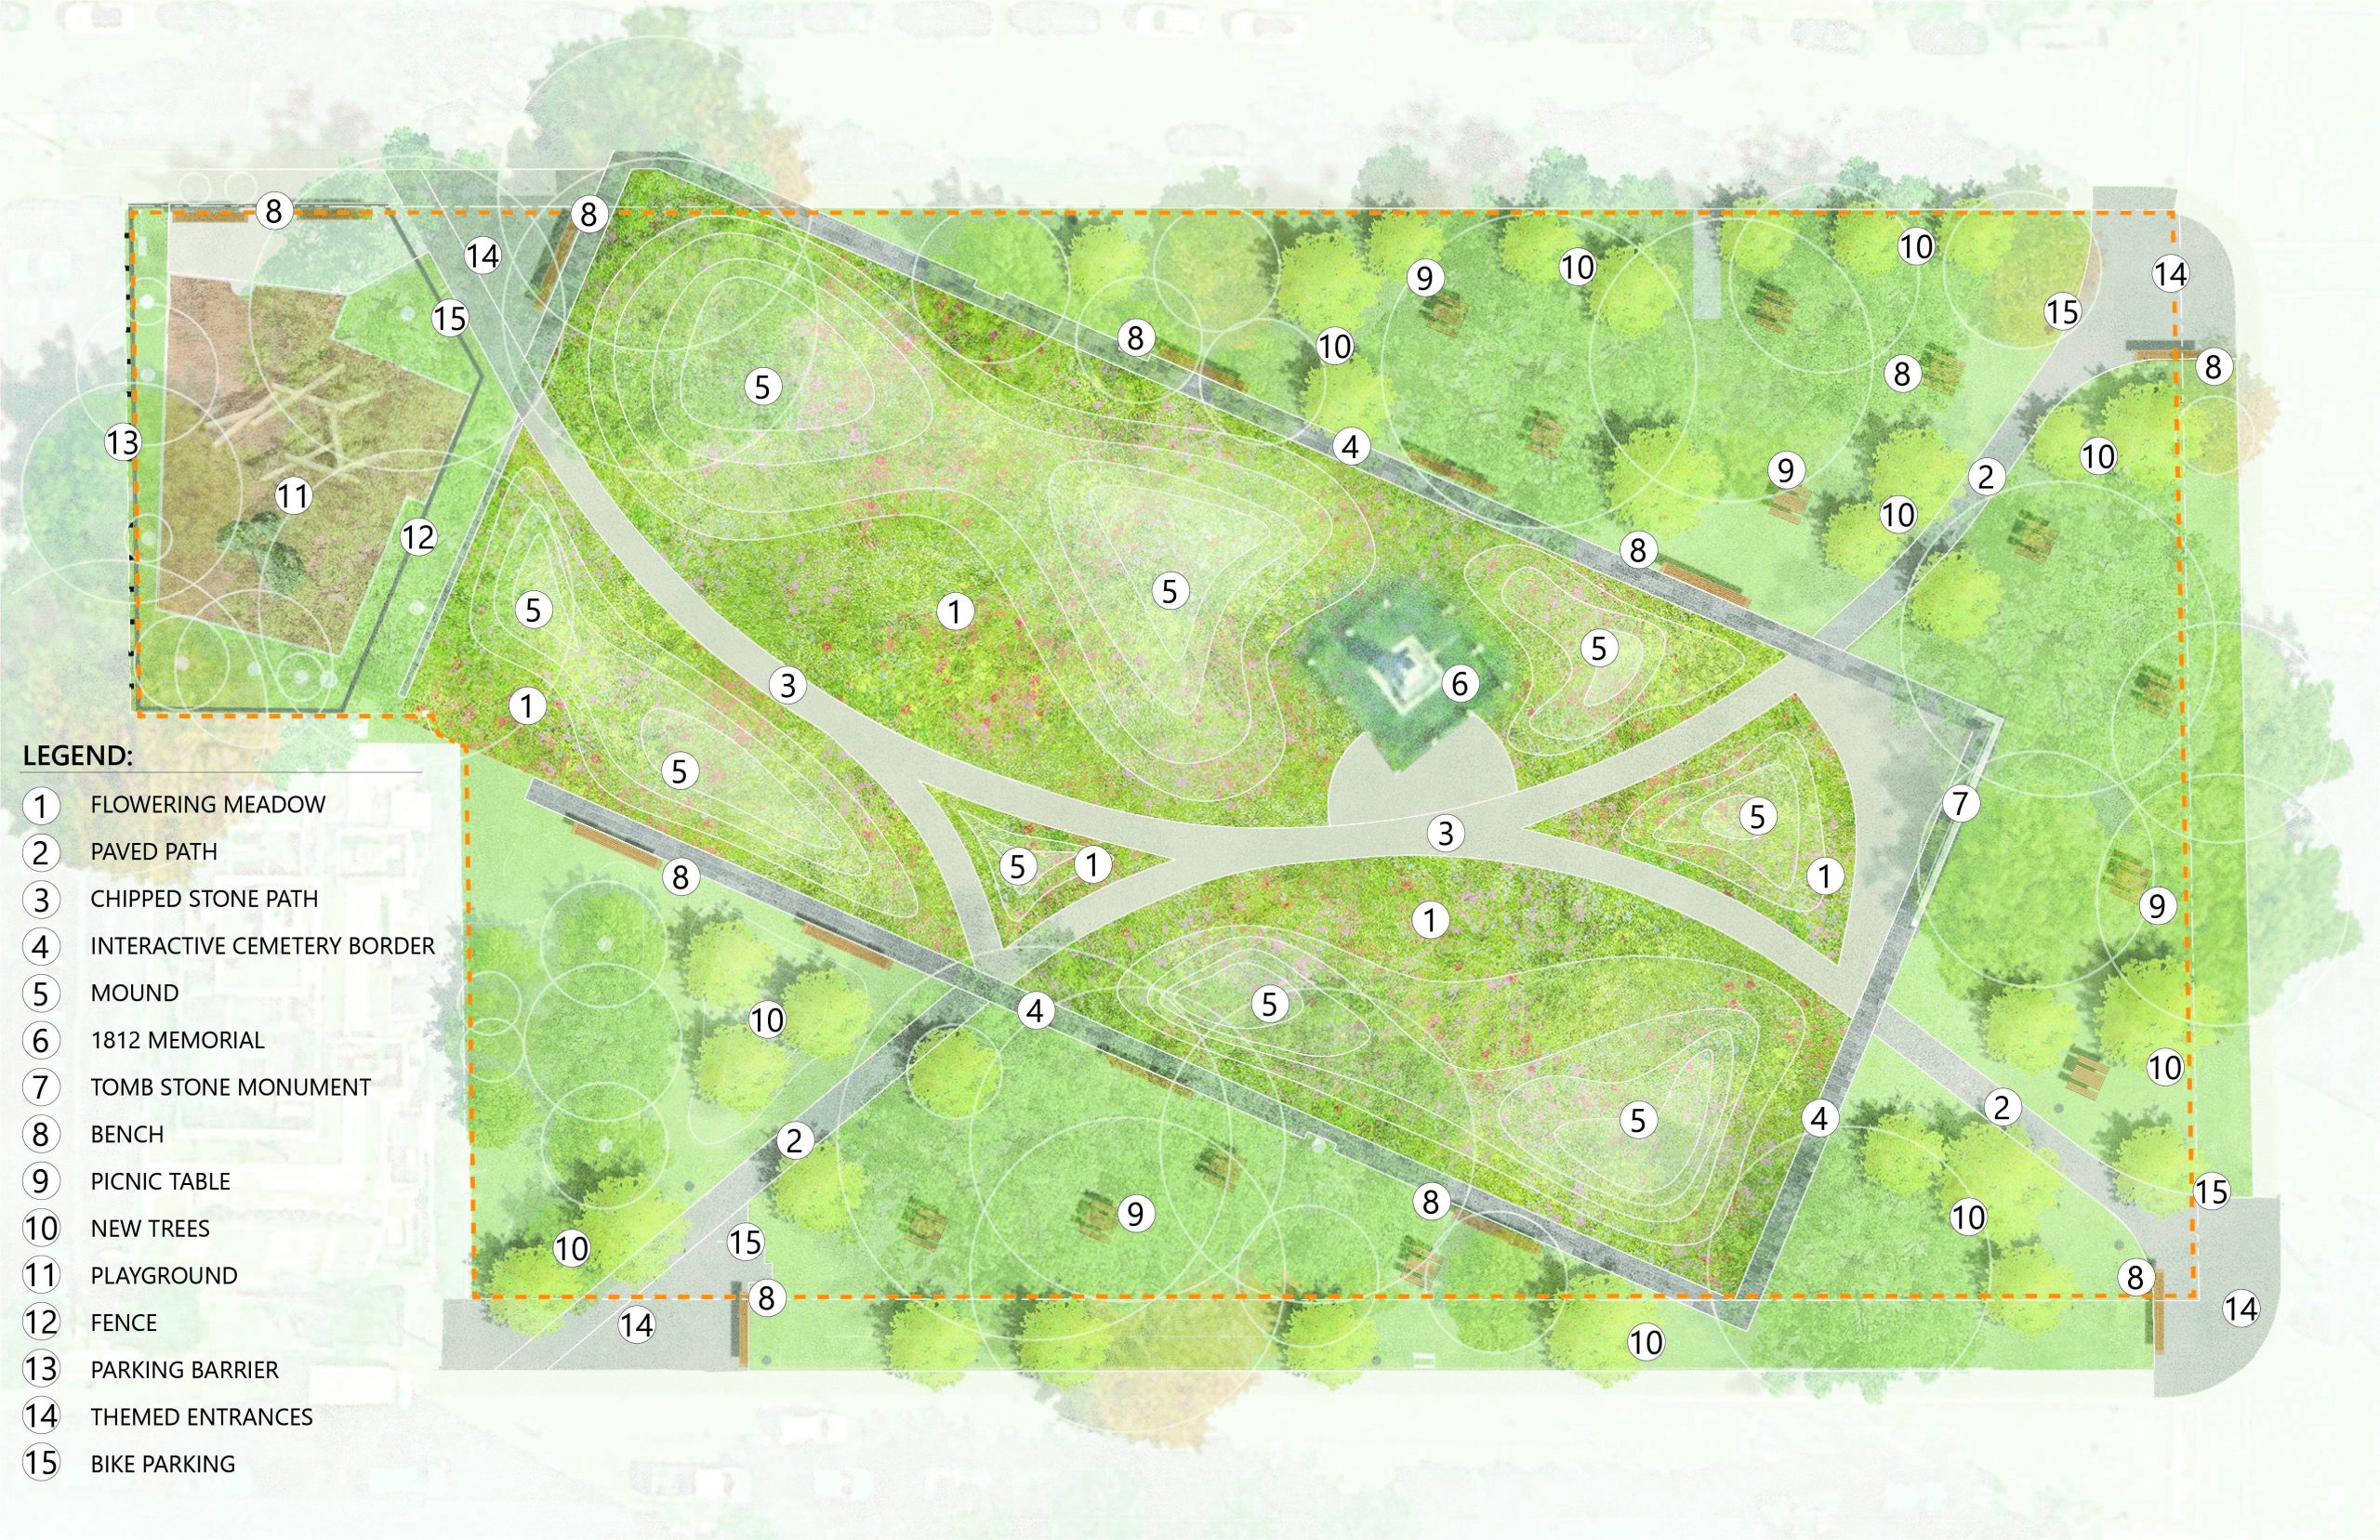 Map of the first design option featuring the existing path configuration with two paths moving through the park, an interactive cemetery border, a flowering meadow covering the cemetery, enhanced park entrances, maintained lawn areas around the cemetery, and new park furniture, including benches and picnic tables.